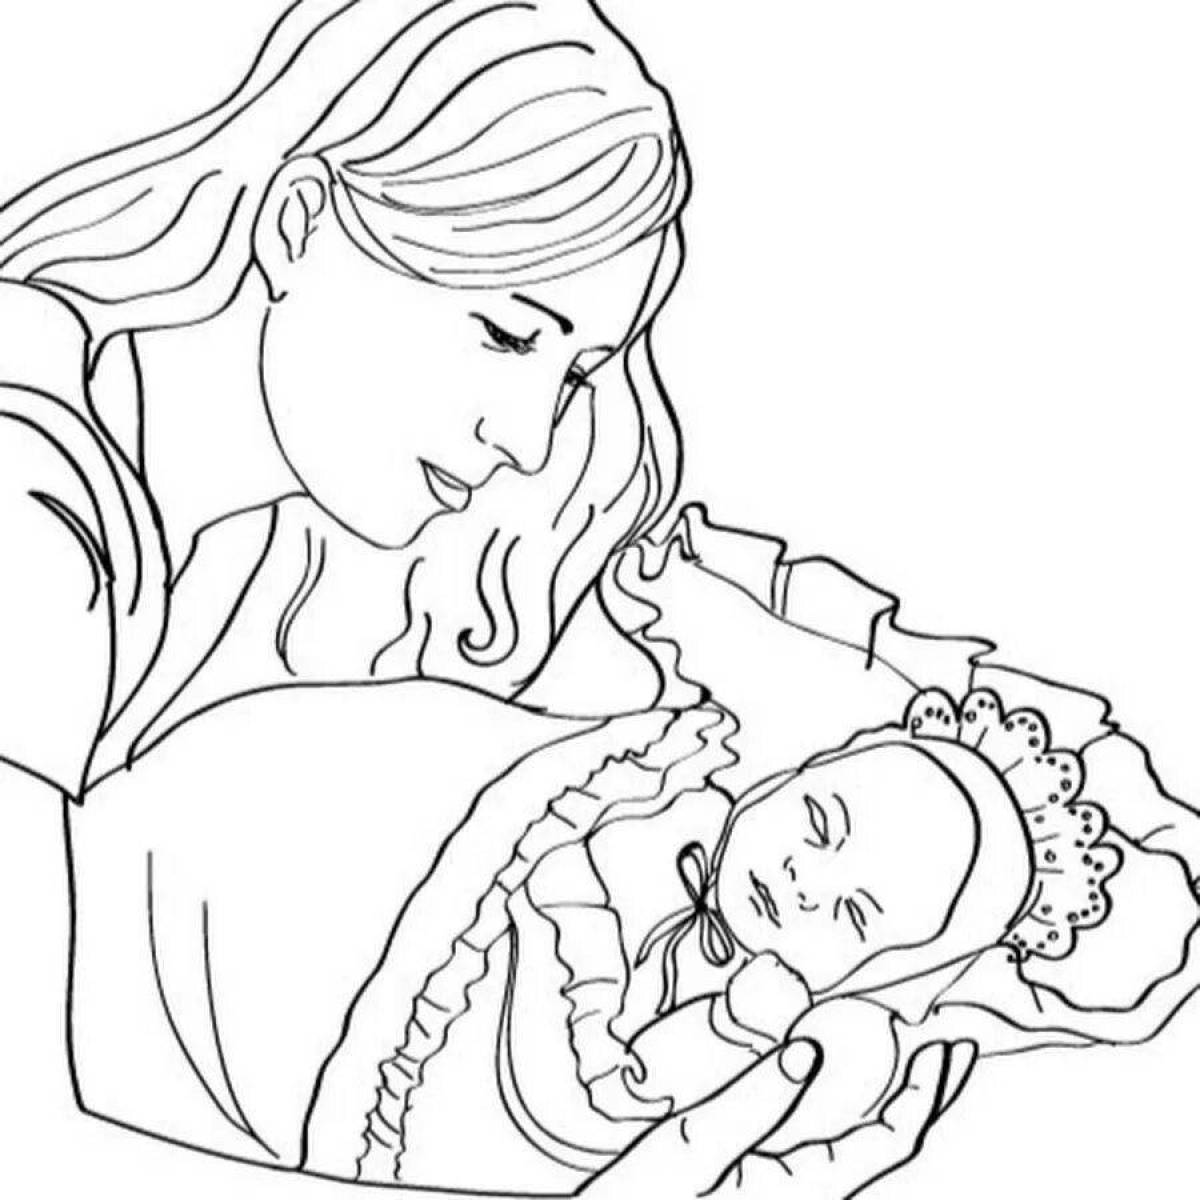 Coloring page loving mom and baby